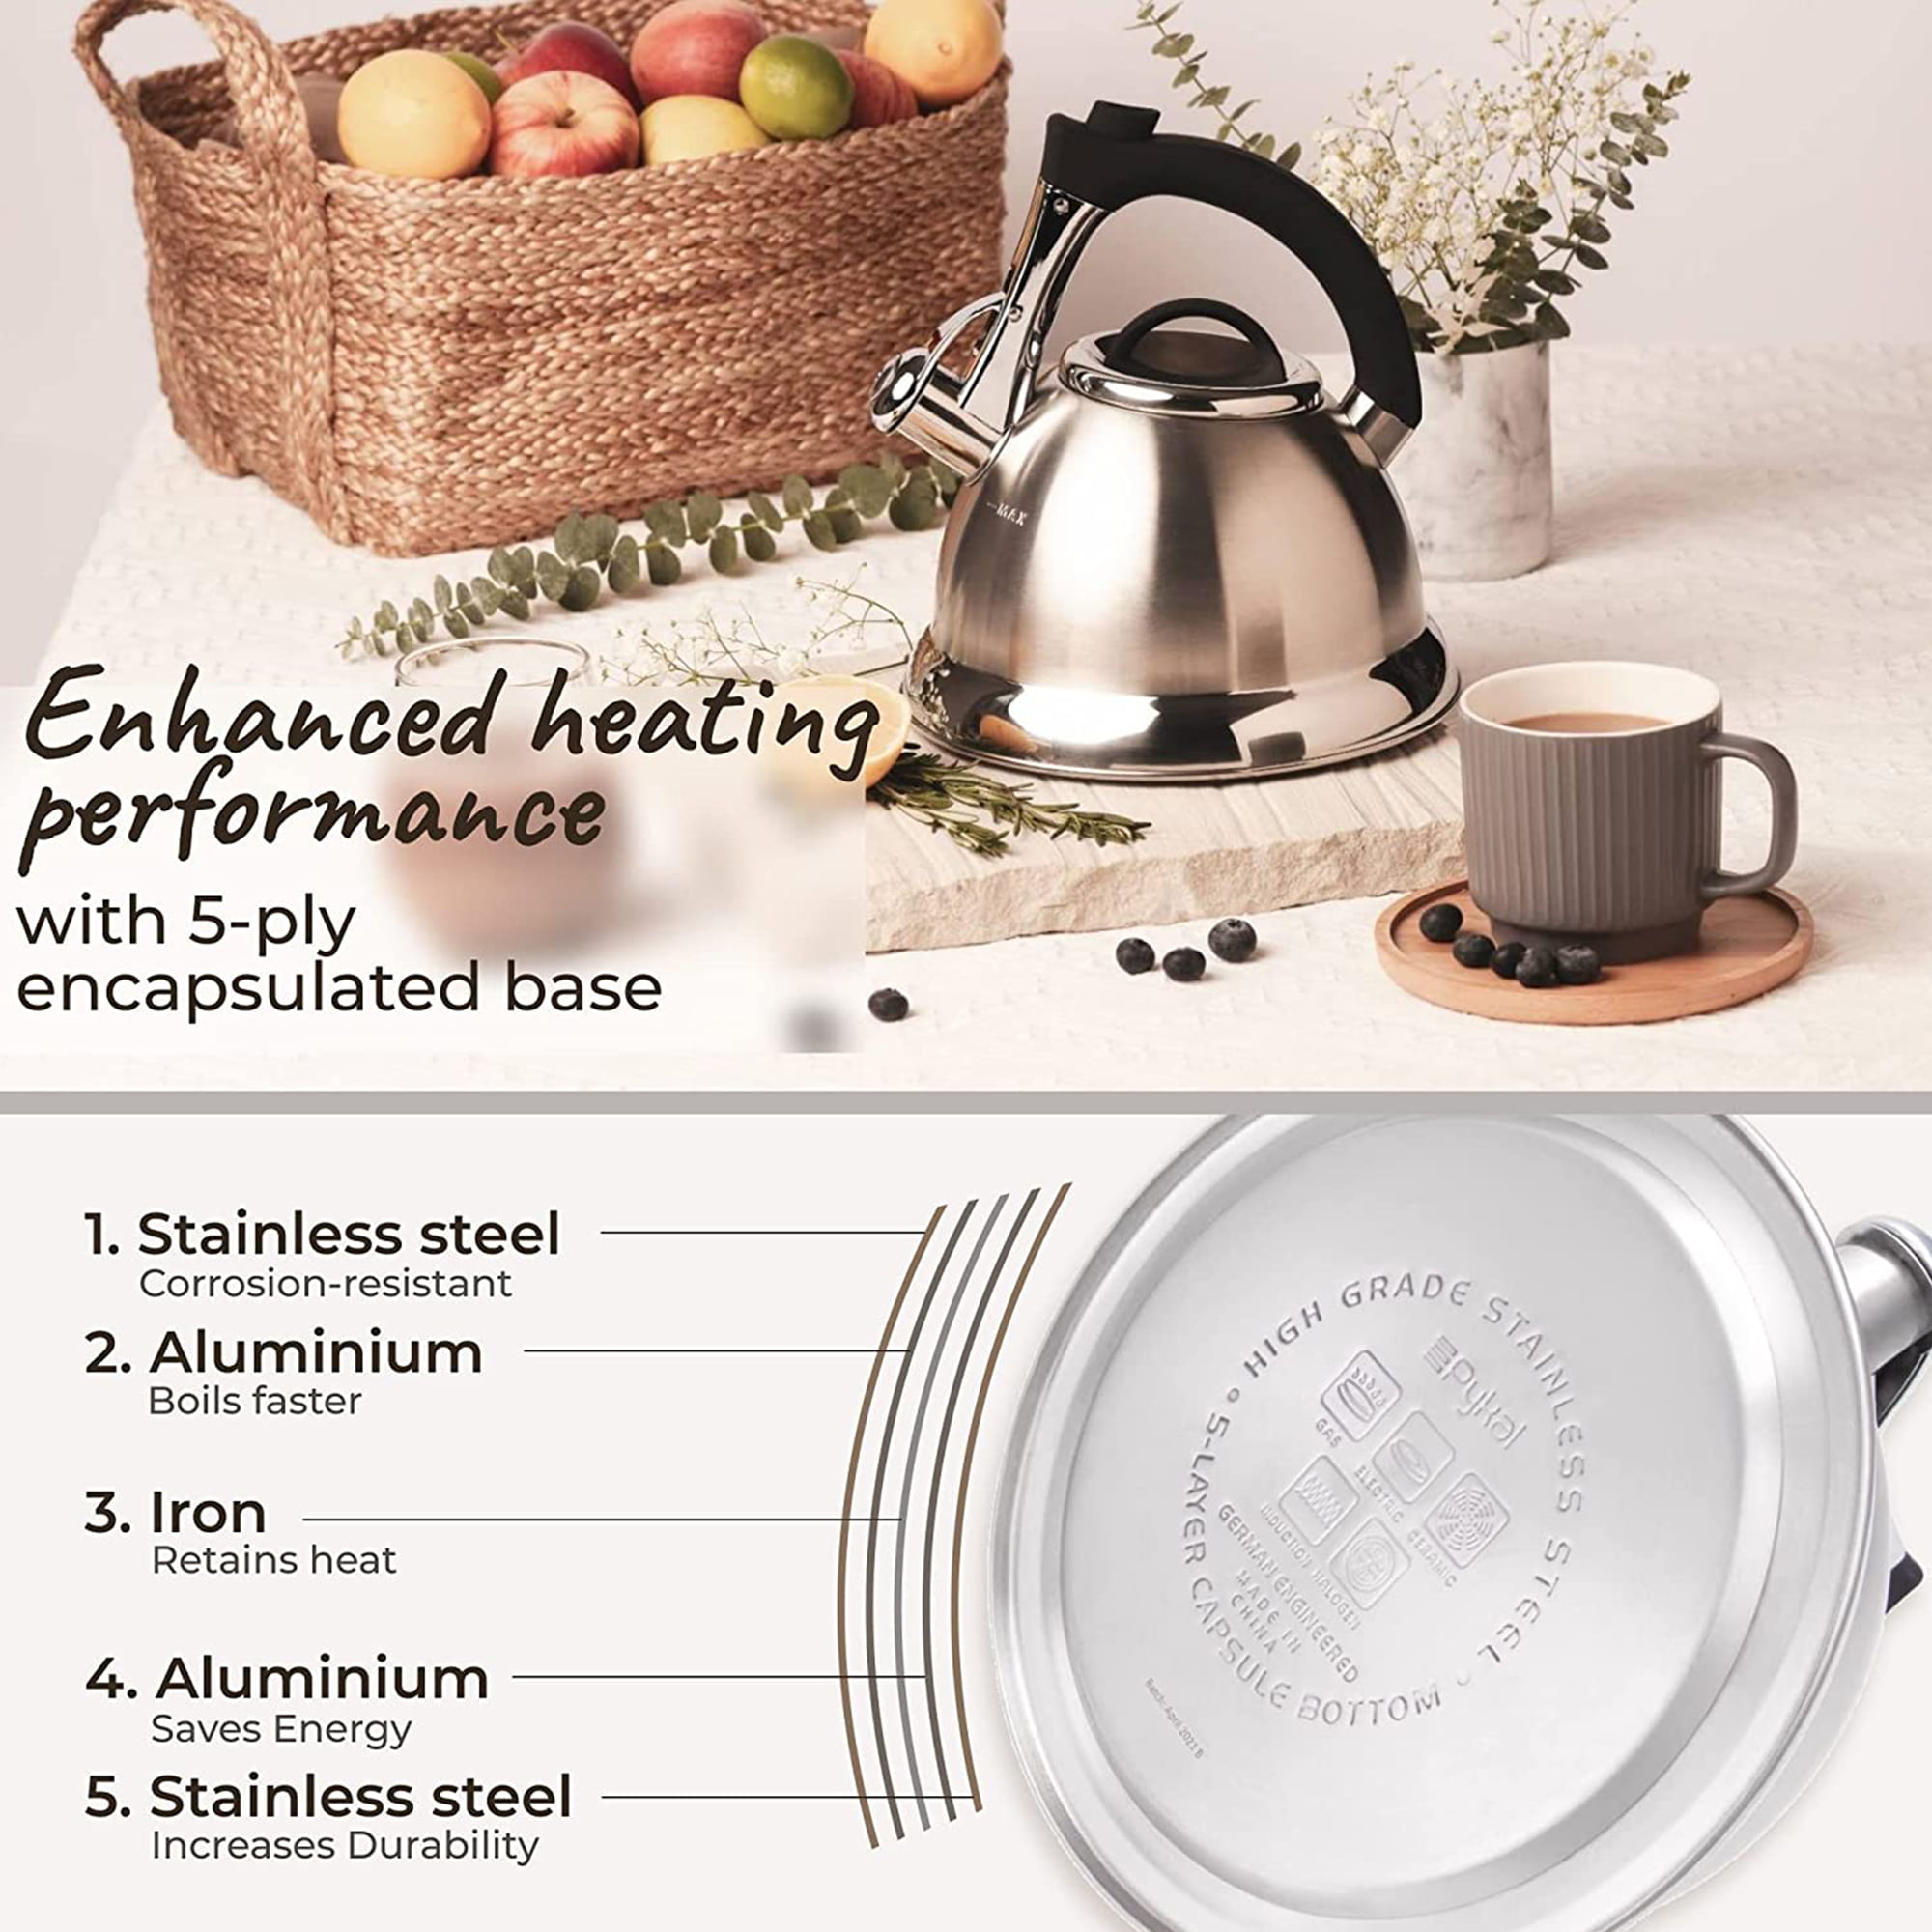 Whistling Tea Kettle with ICool Handle by Pykal